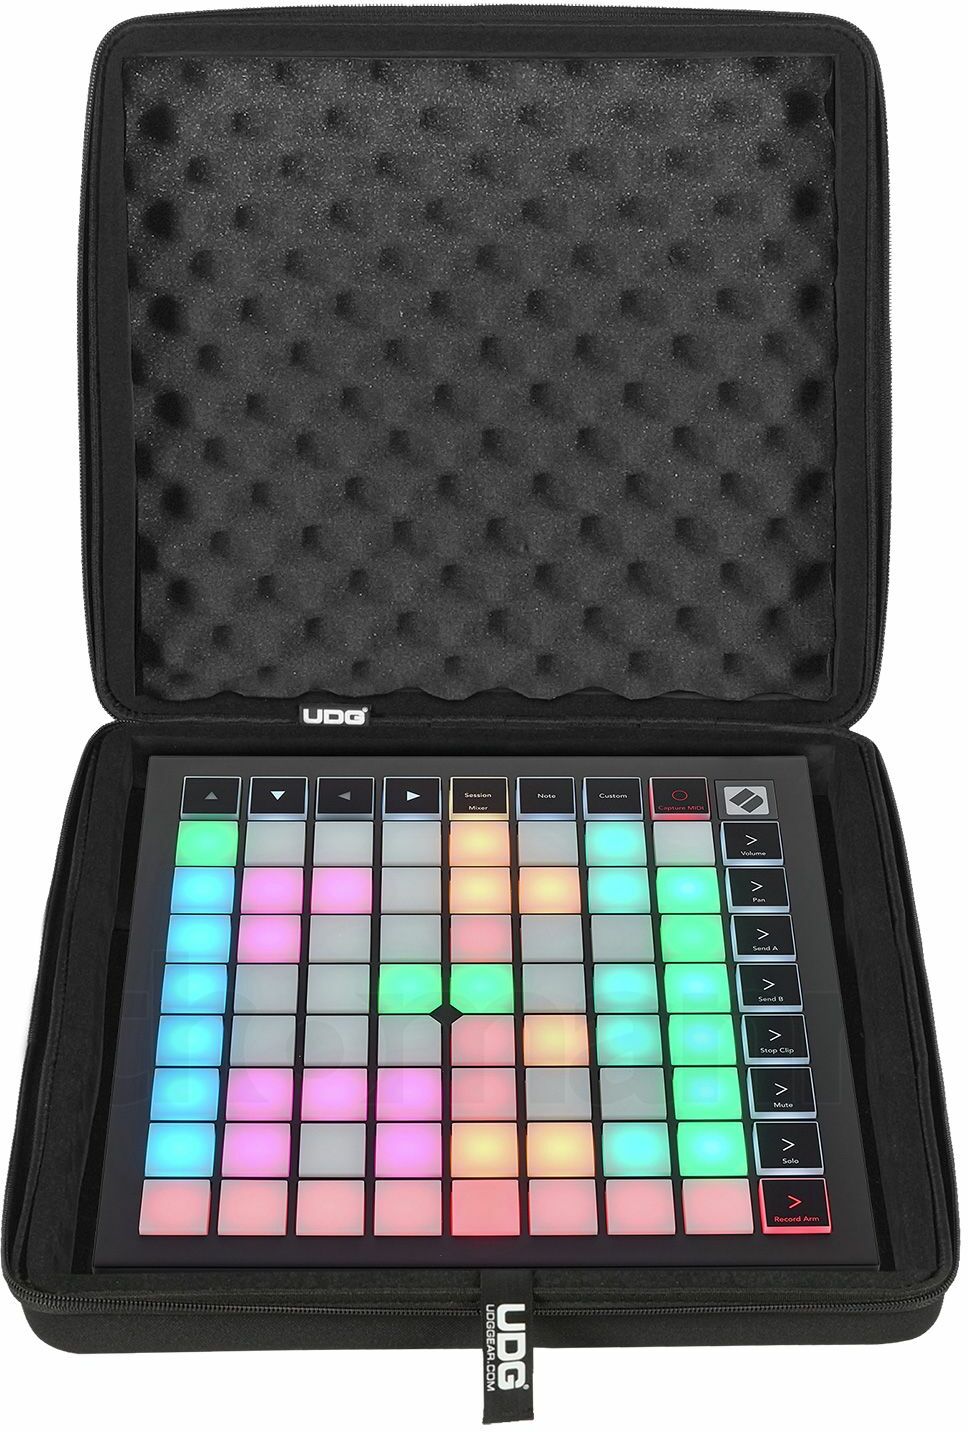 Udg U 8487 Bl (housse Pour Launchpad X) - Gigbag for studio product - Main picture